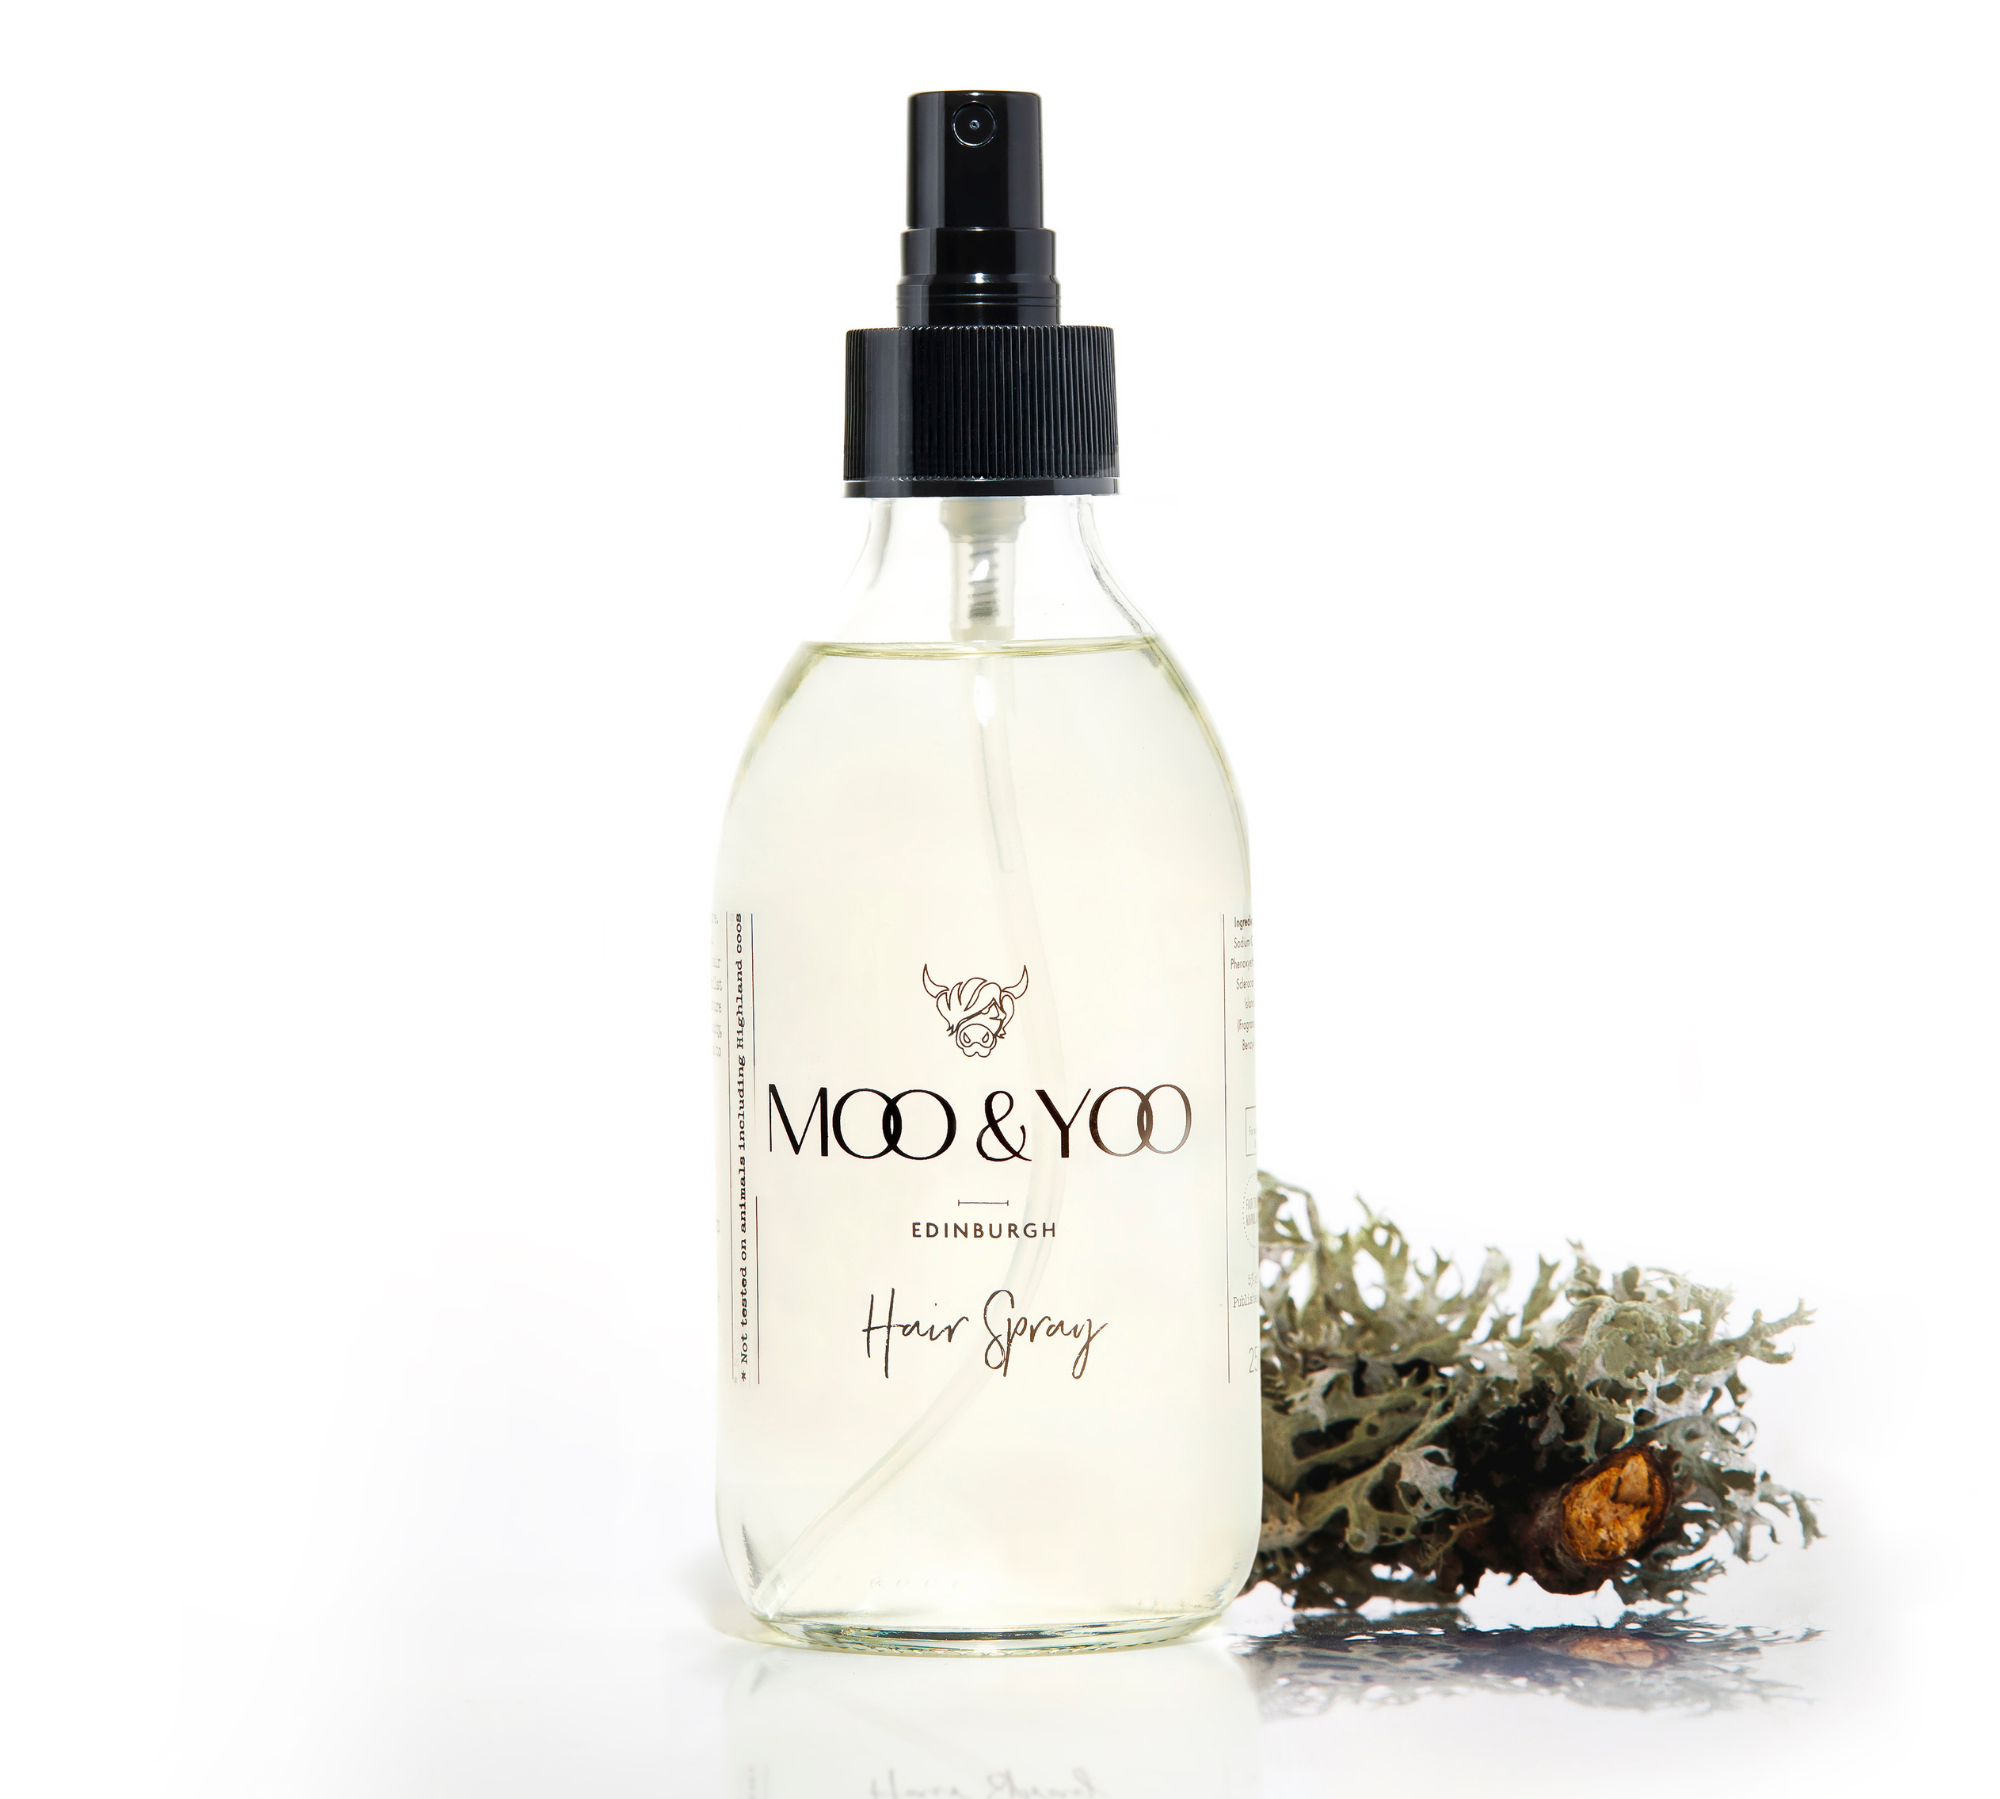 A glass bottle of Moo and Yoo Hair Spray on a white background with a sprig of Icelandic moss placed to one side